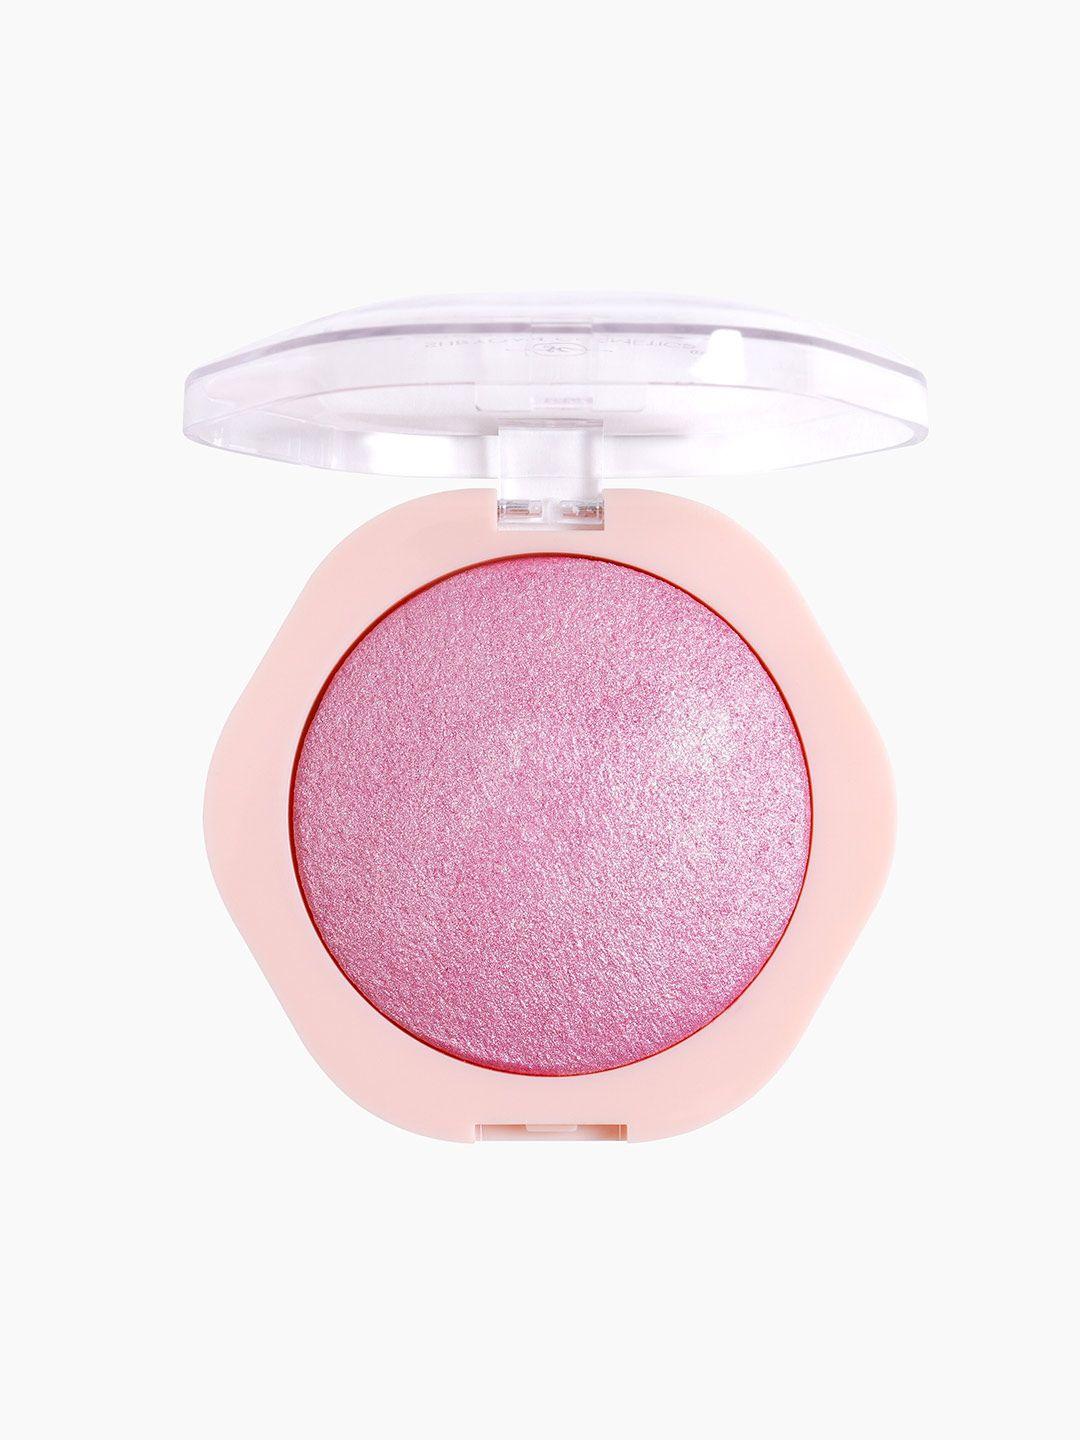 shryoan-sparkle-make-it-pigment-highlighter-12g---peach-pink-05